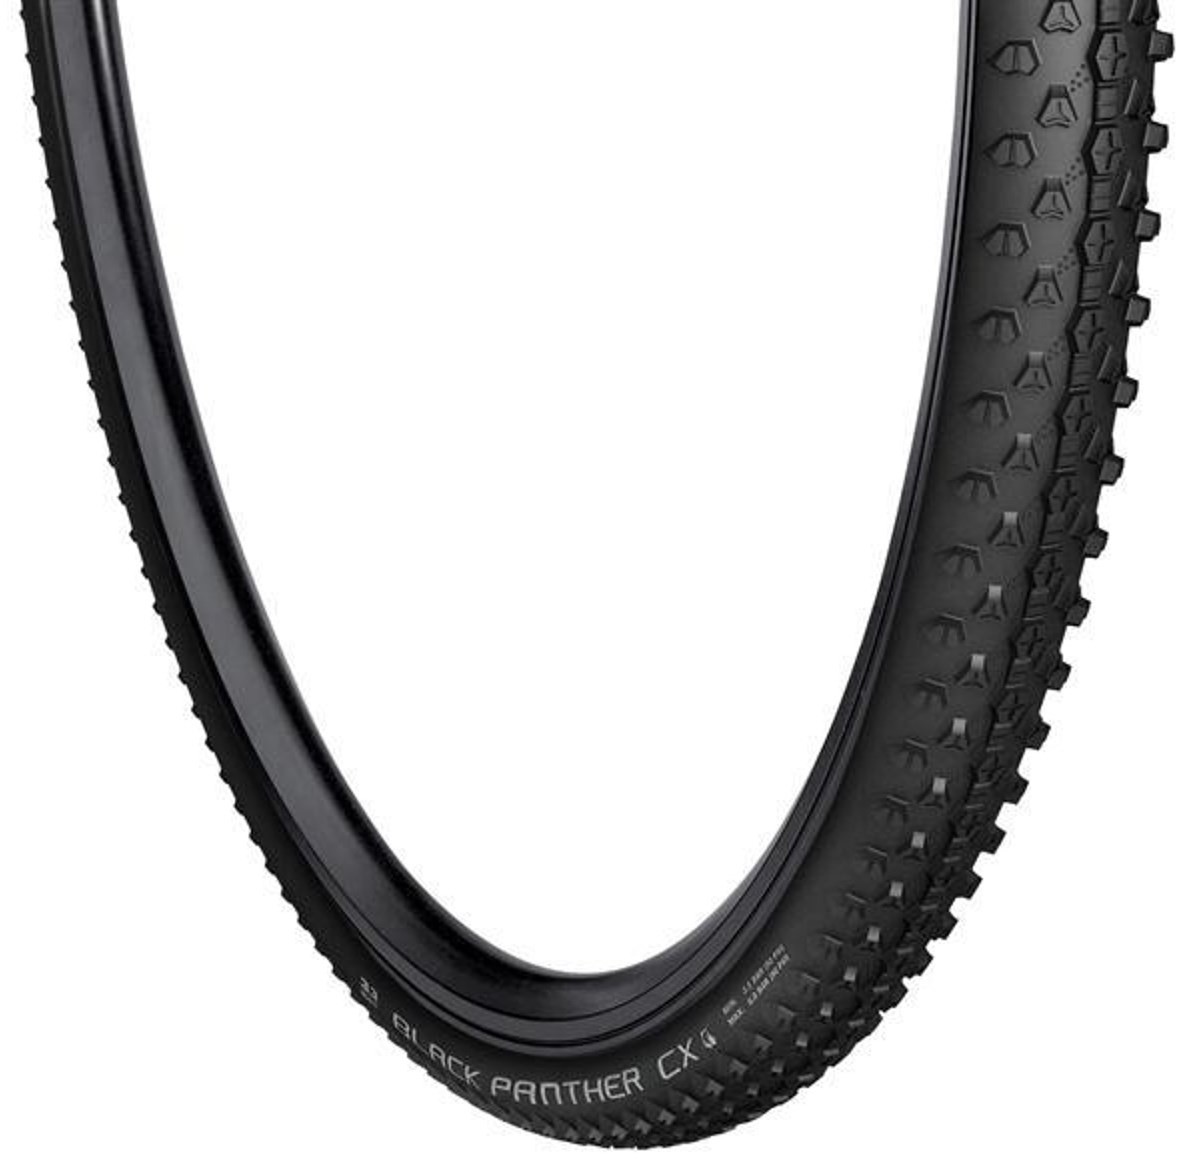 Vredestein Black Panther CX Cyclocross Tyre